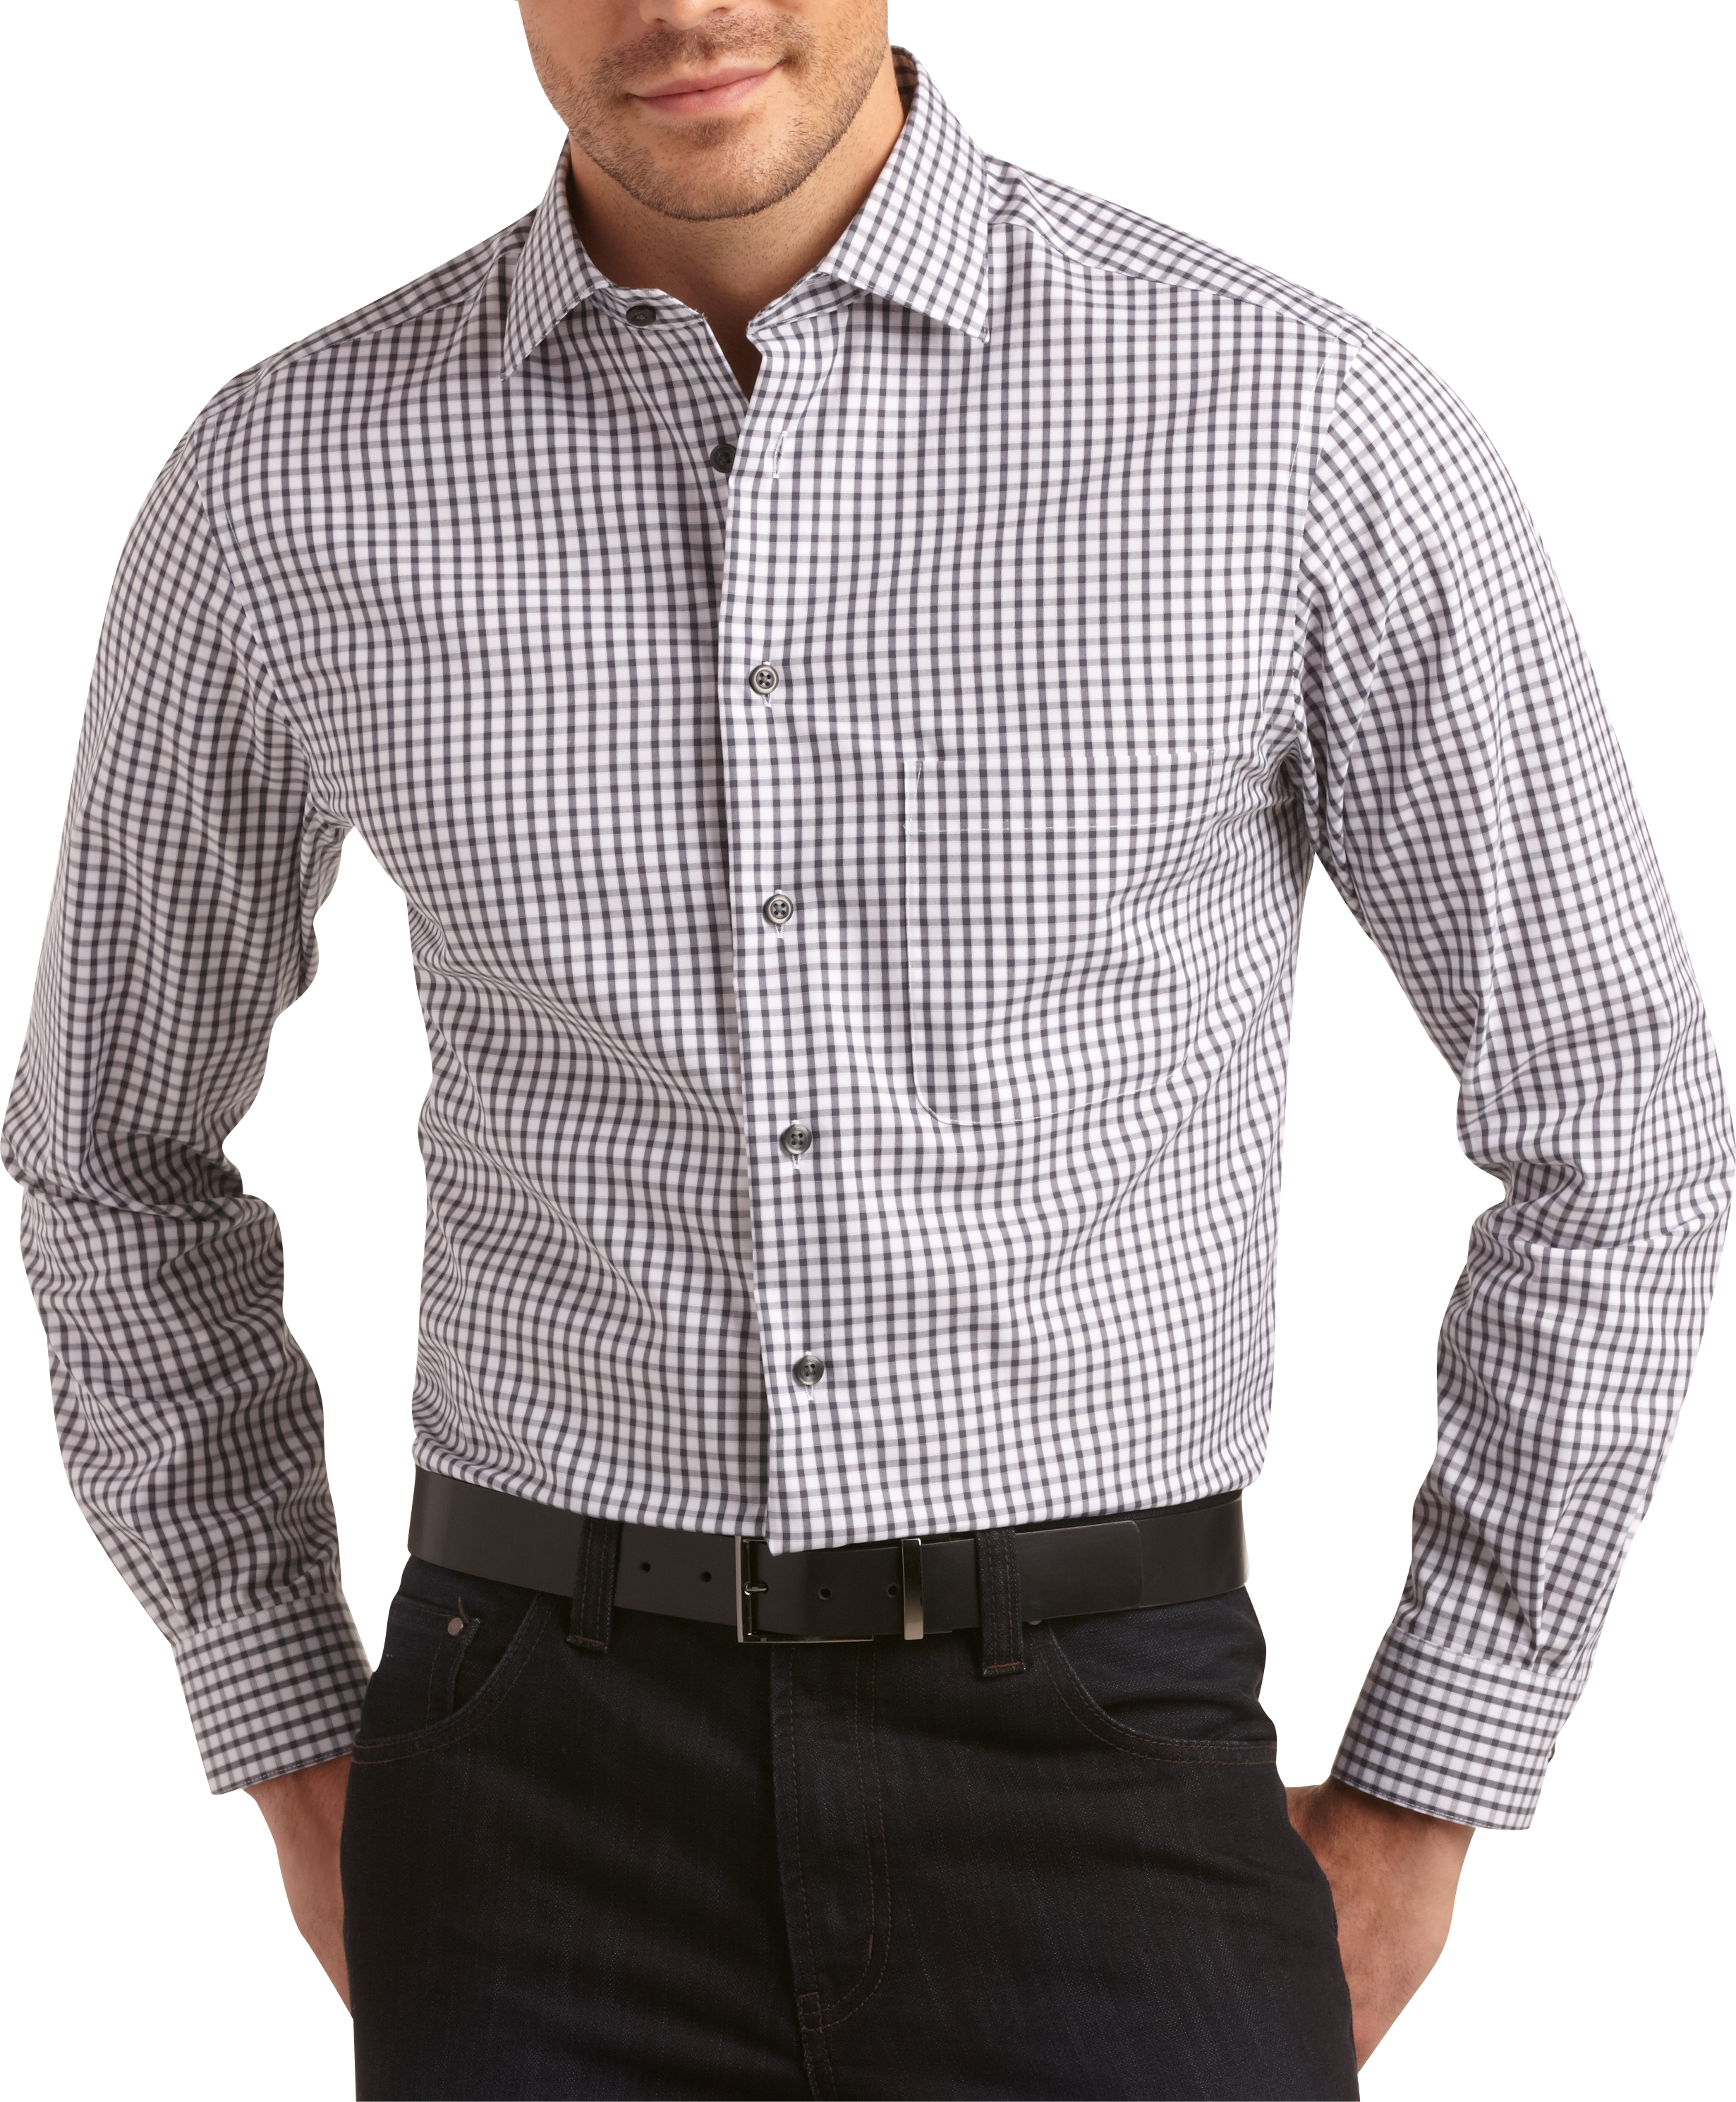 Pronto Uomo White and Charcoal Check Modern Fit Sport Shirt - Men's ...